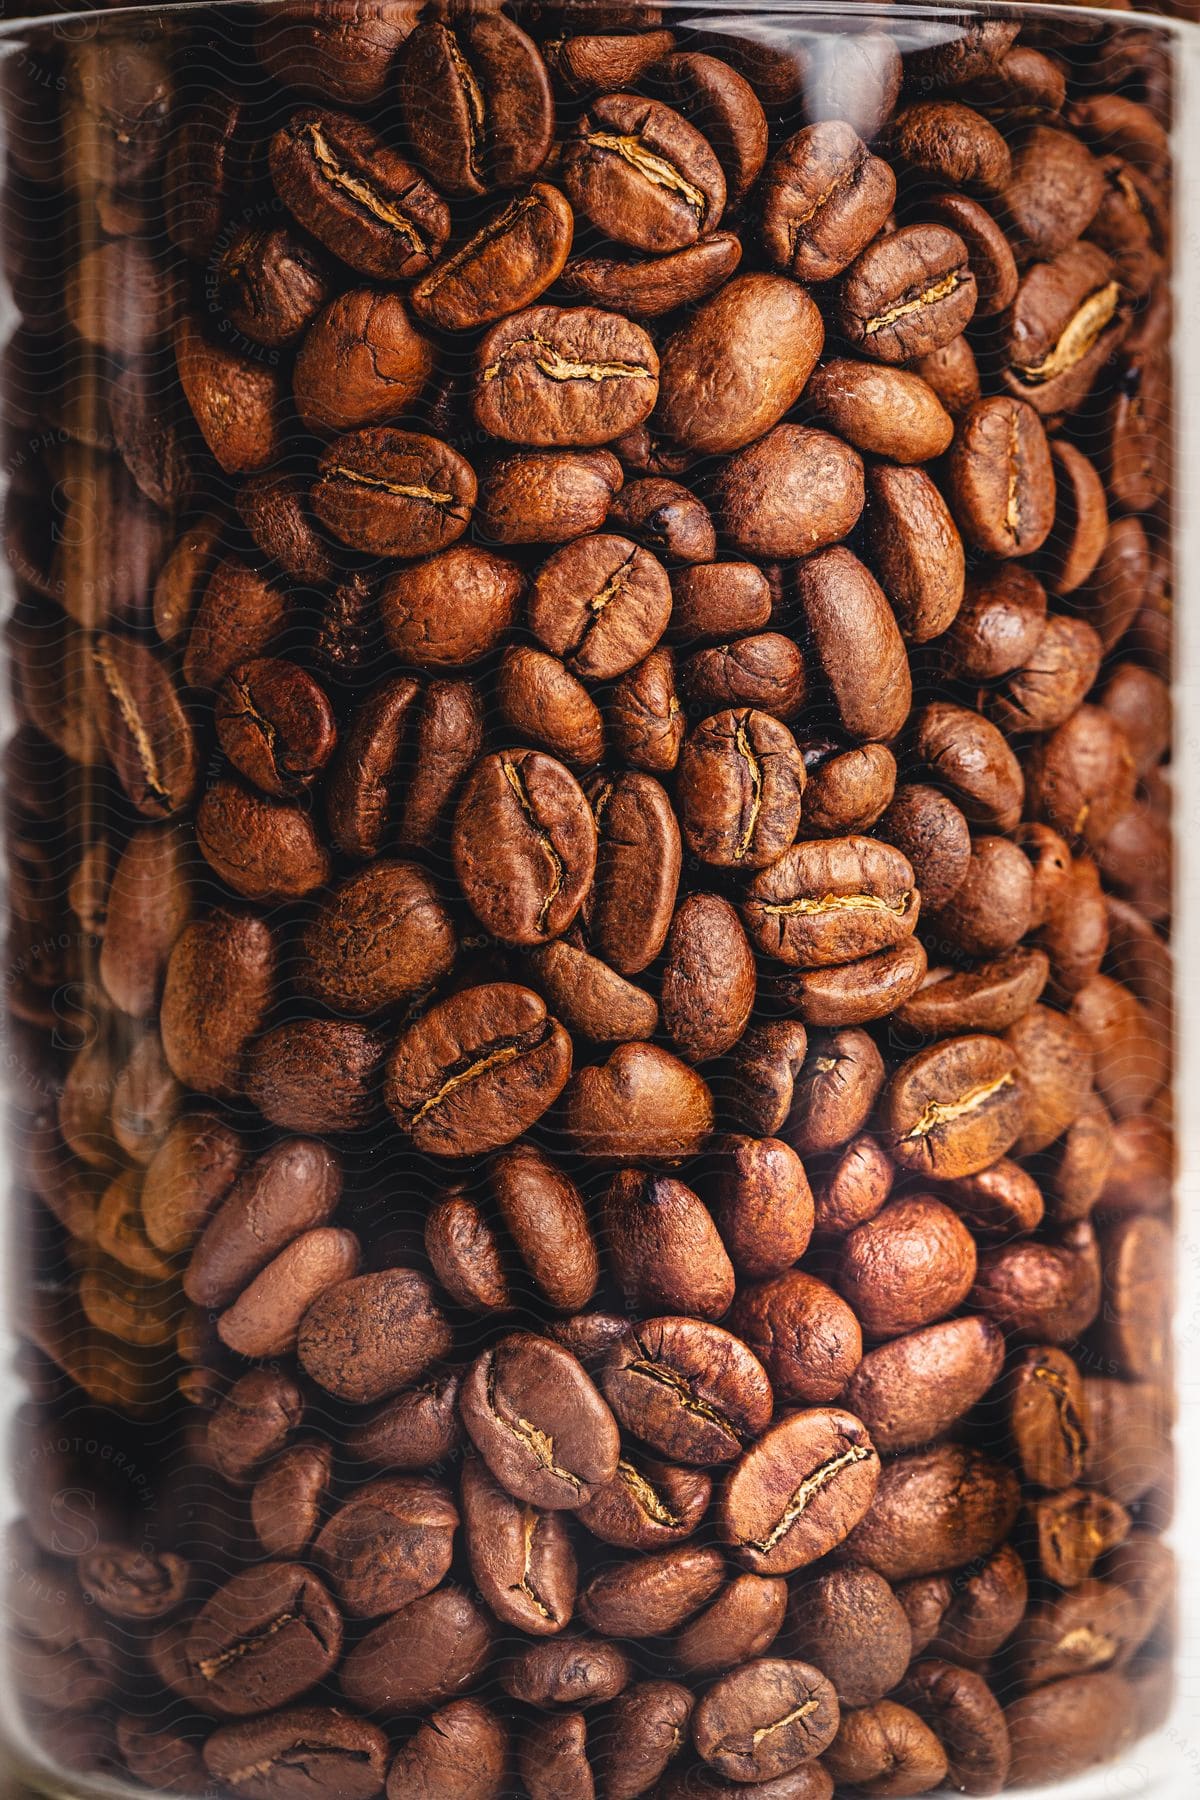 A coffee jar containing aromatic coffee beans